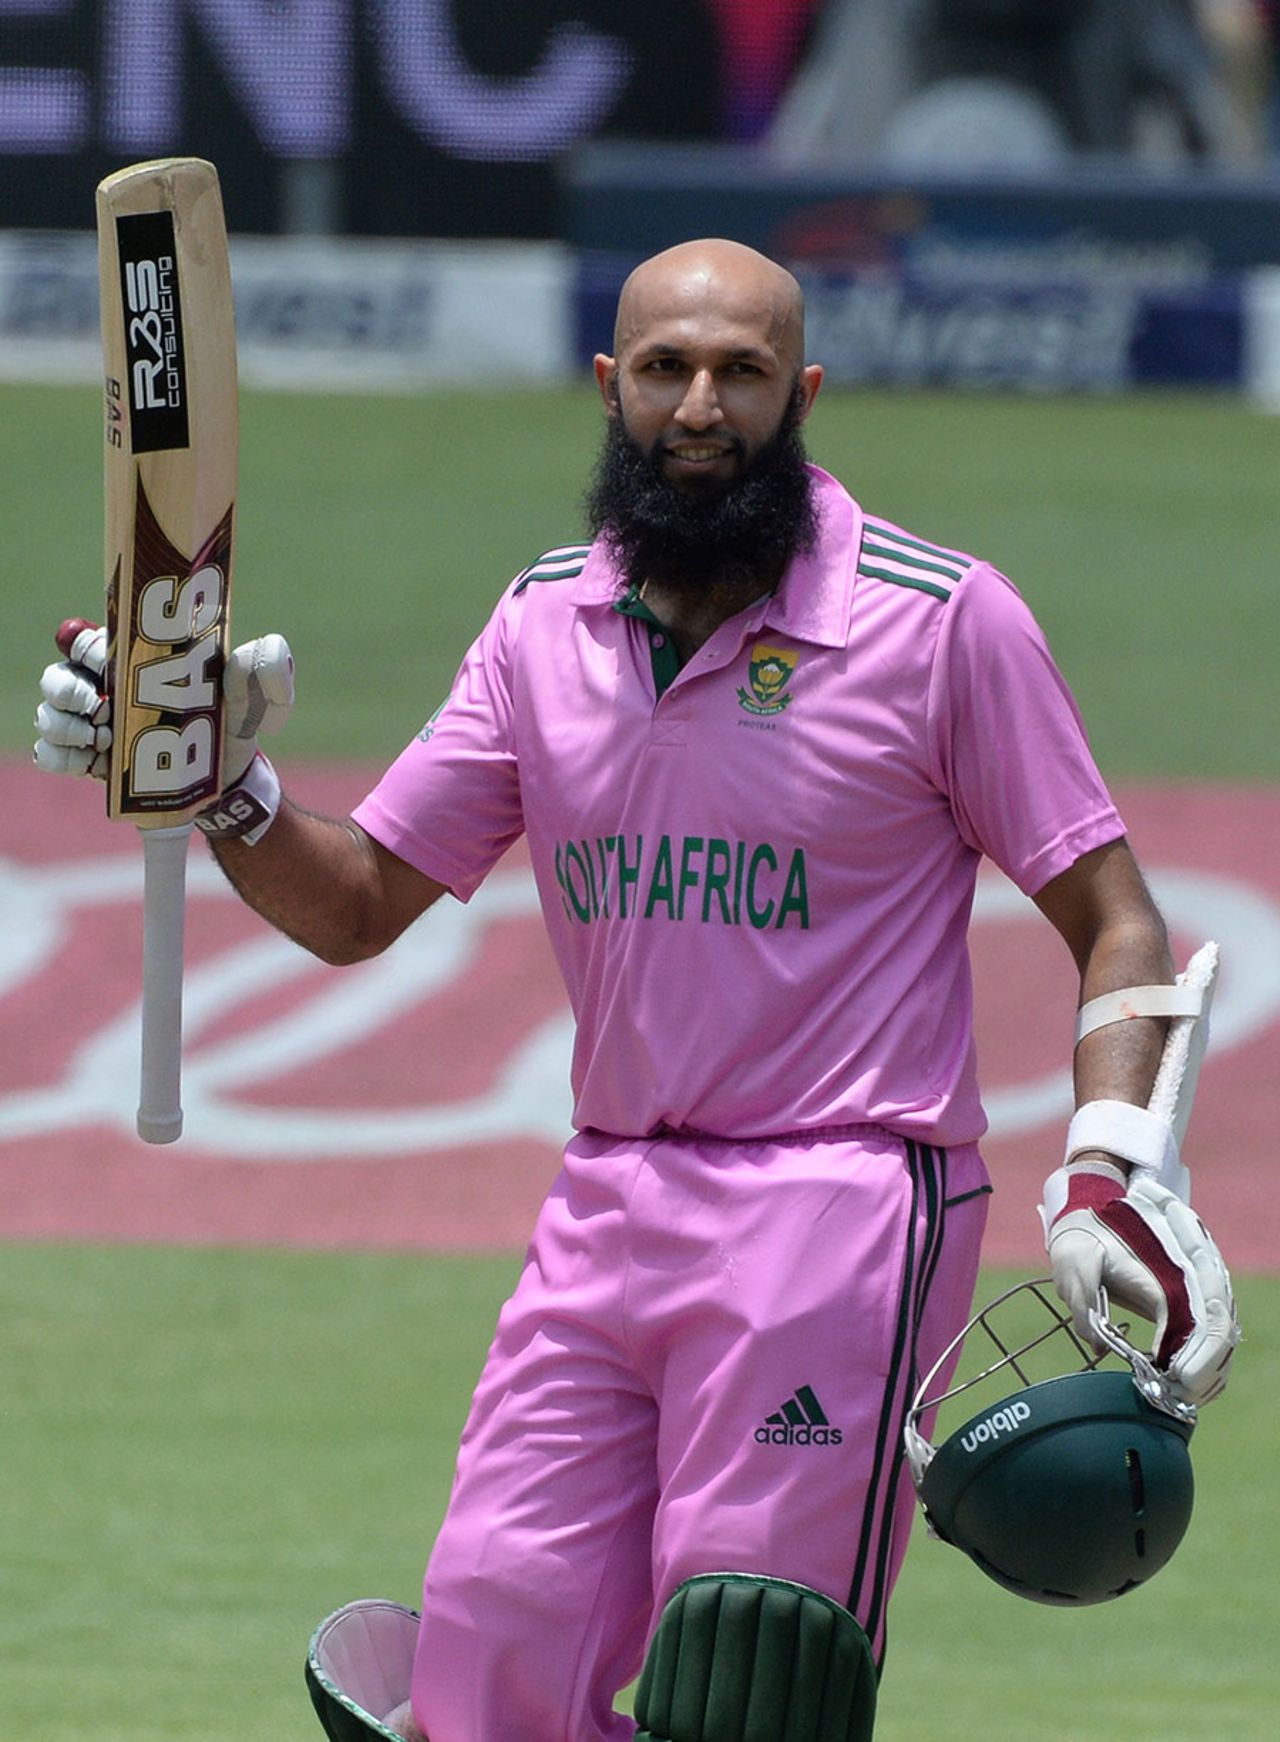 Hashim Amla made his career-best score 153 not out, South Africa v West Indies, 2nd ODI, Johannesburg, January 18, 2015